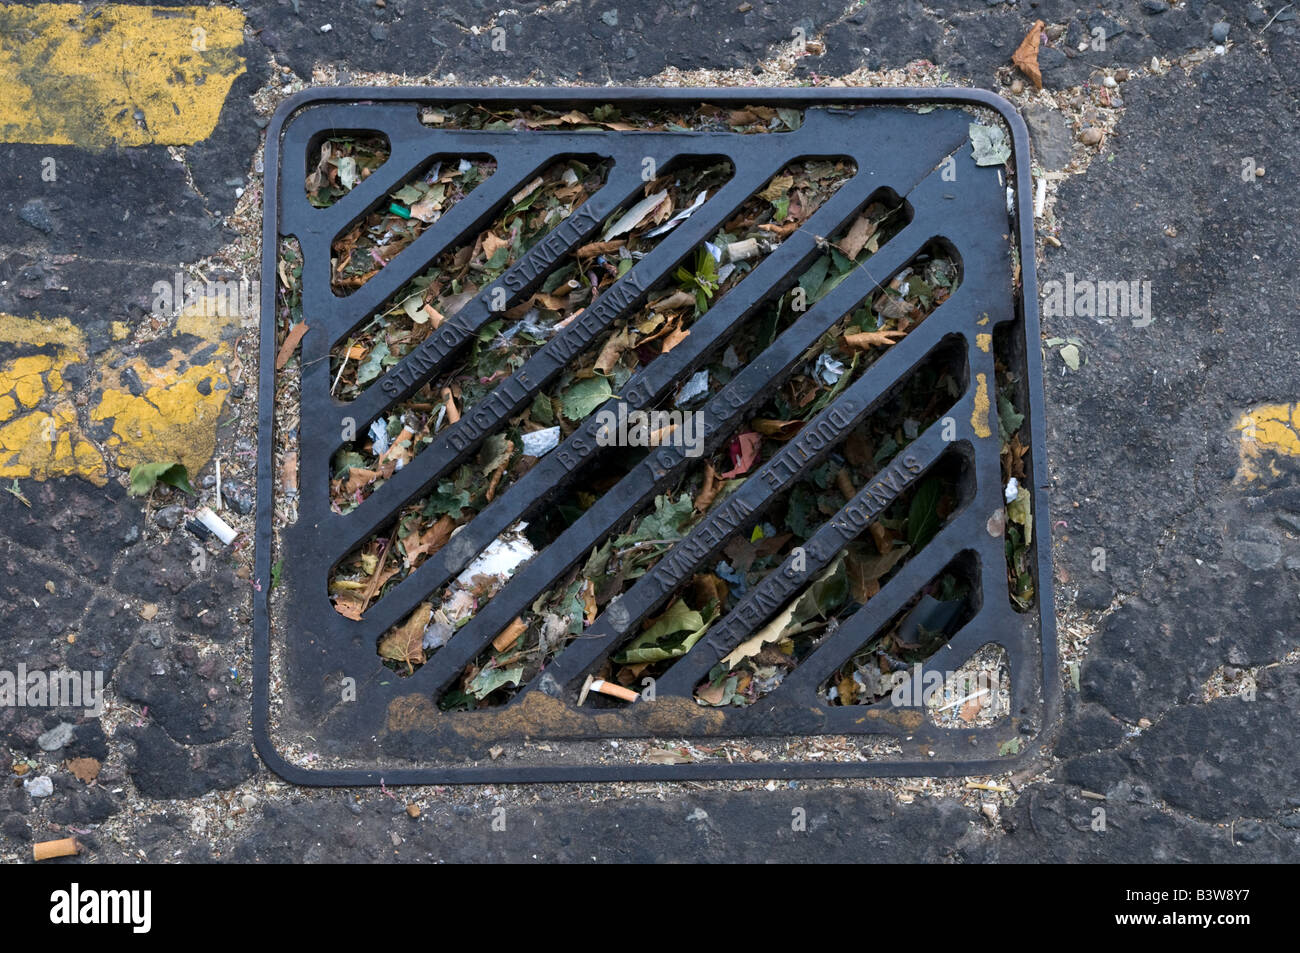 14 Common Causes of Clogged Drains and How to Deal With Them - Dengarden